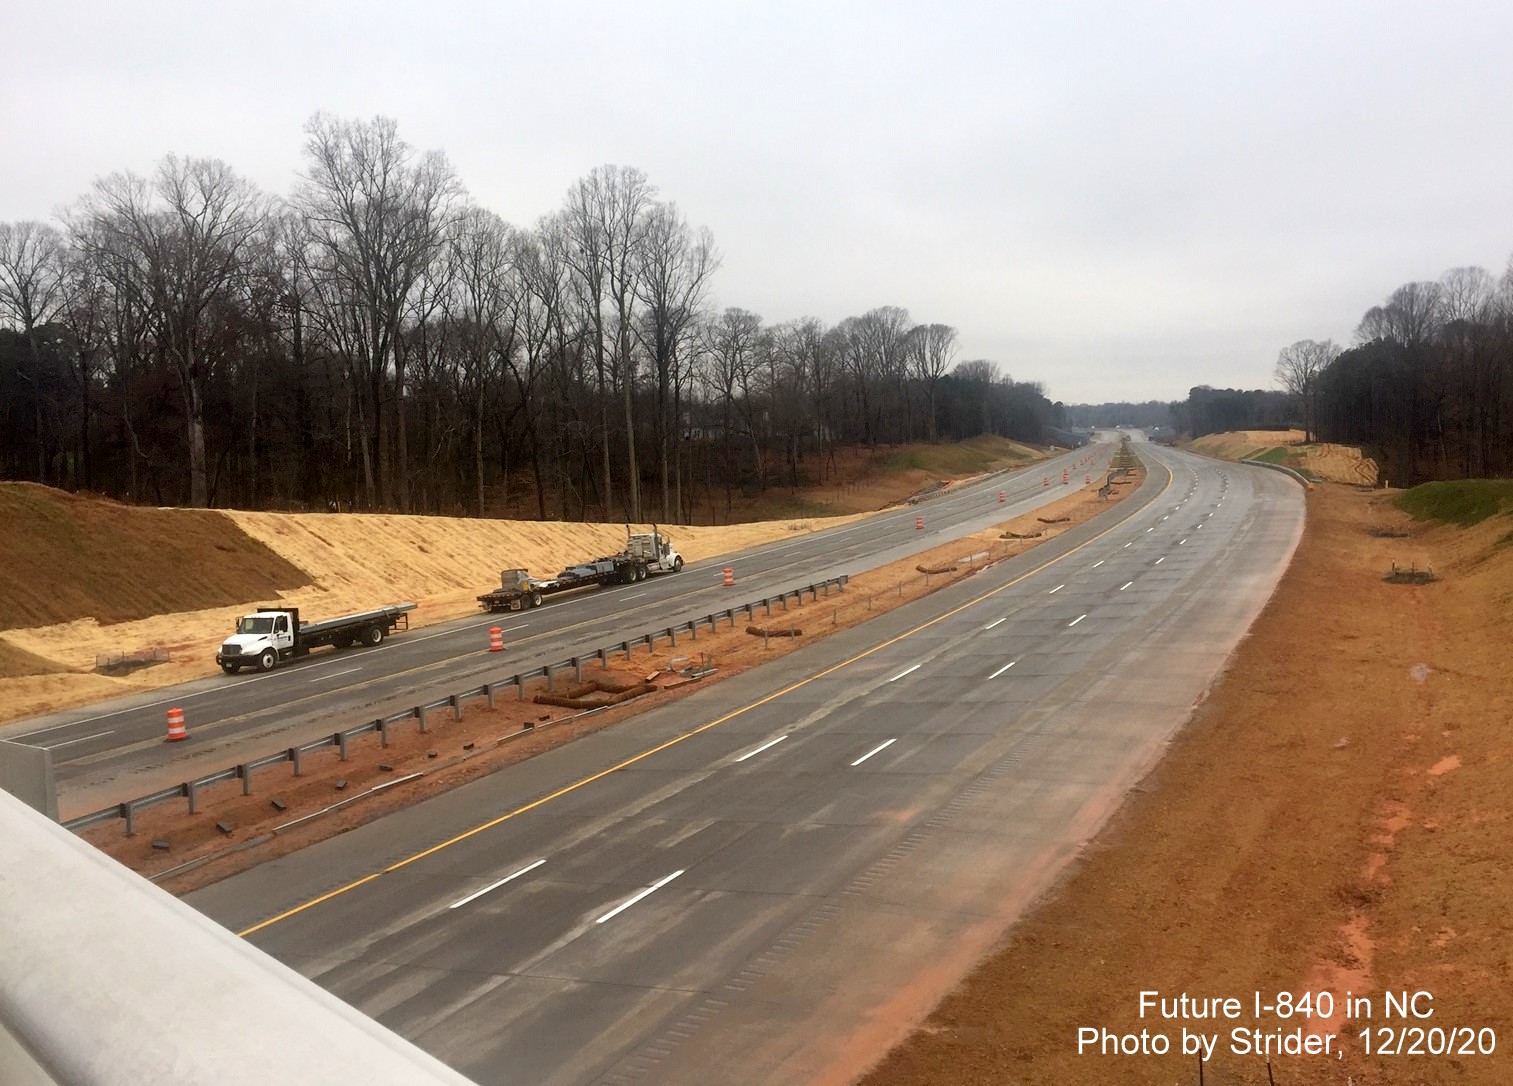 Image of new lane markings being placed along soon to be opened section of I-840 Greensboro Urban Loop between Lawndale Drive and North Elm Street, photo by Strider, December 2020